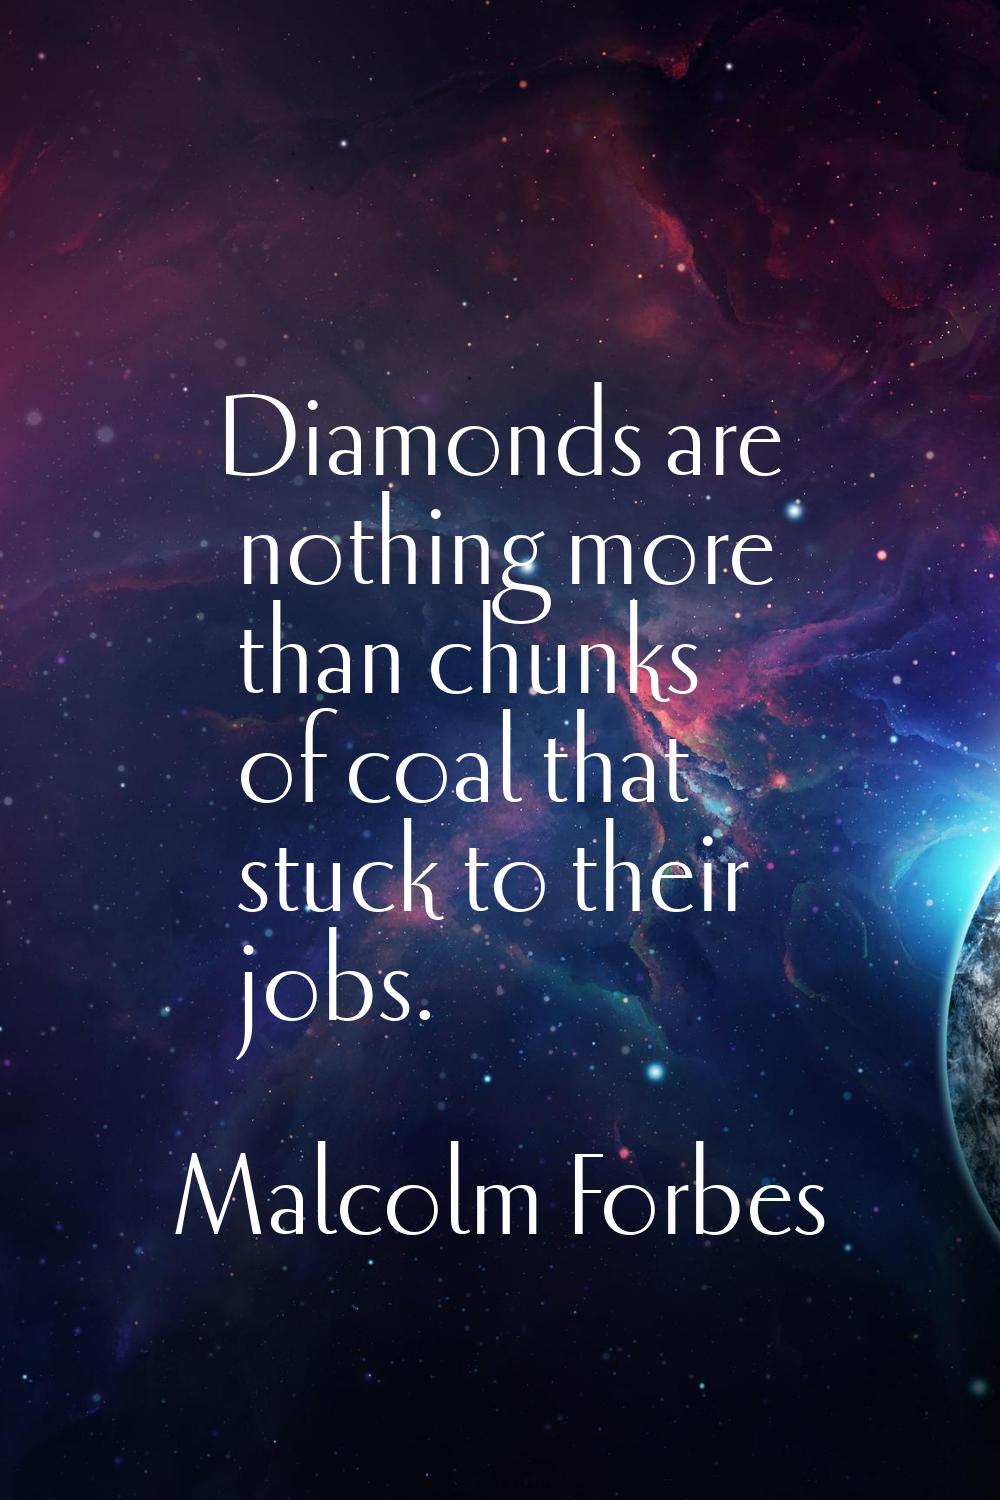 Diamonds are nothing more than chunks of coal that stuck to their jobs.